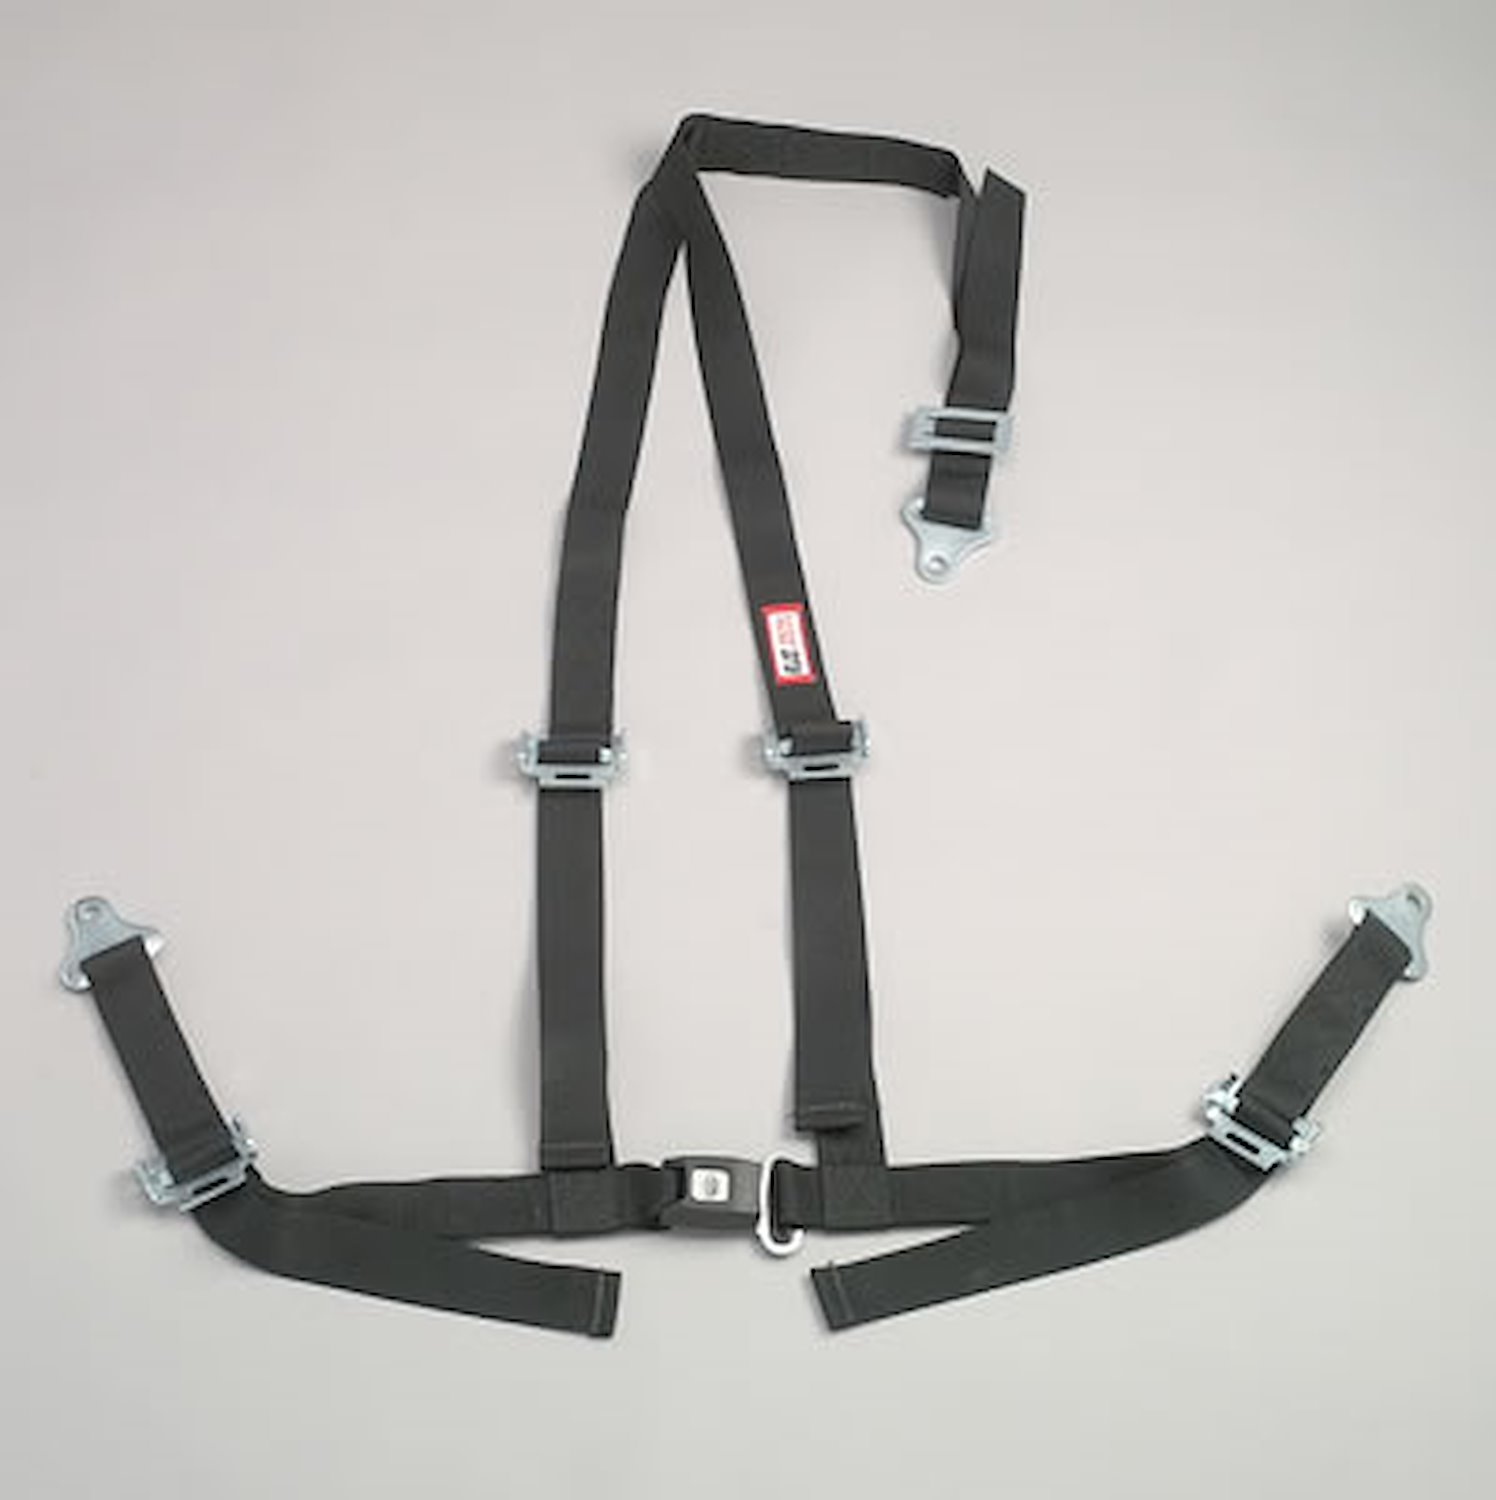 NON-SFI B&T HARNESS 2 PULL DOWN Lap Belt SNAP 2 S.H. INDIVIDUAL FLOOR Mount WRAP/BOLT OD GREEN